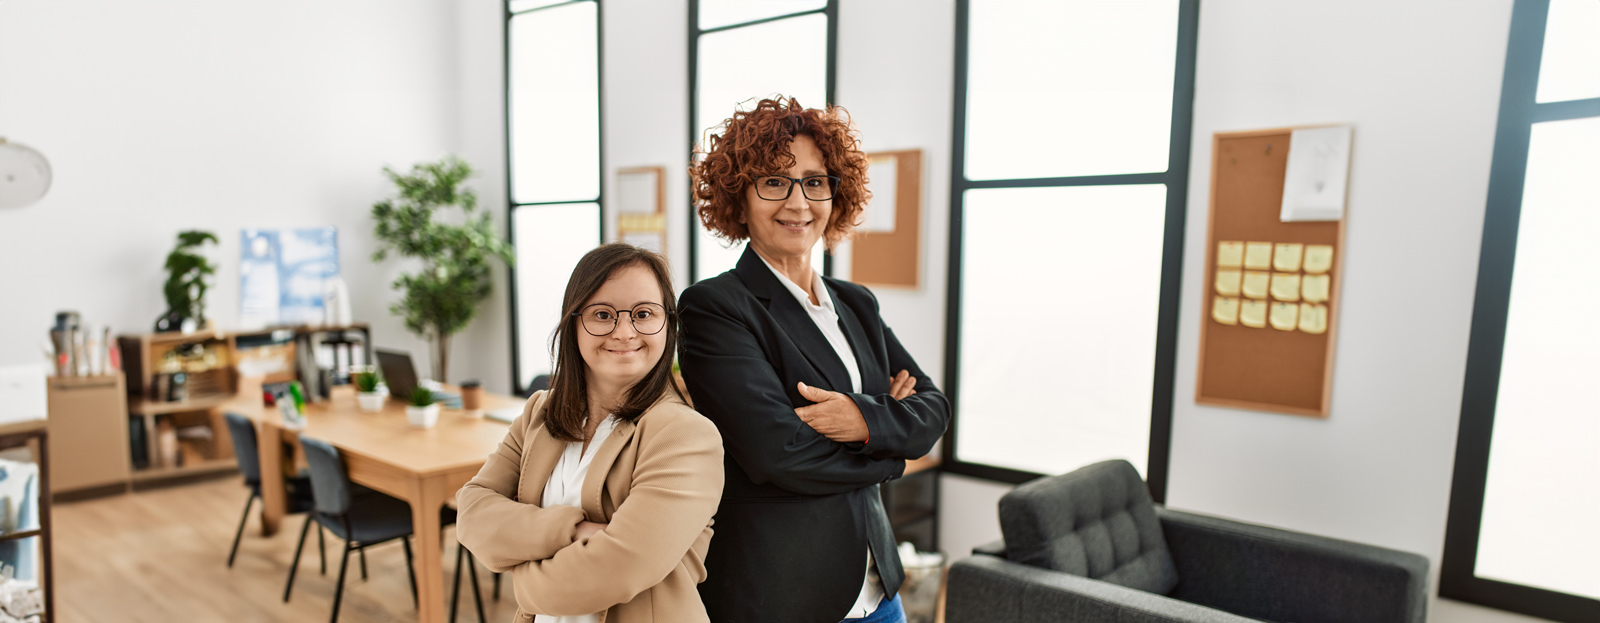 Two woman standing back to back in an office smiling at camera